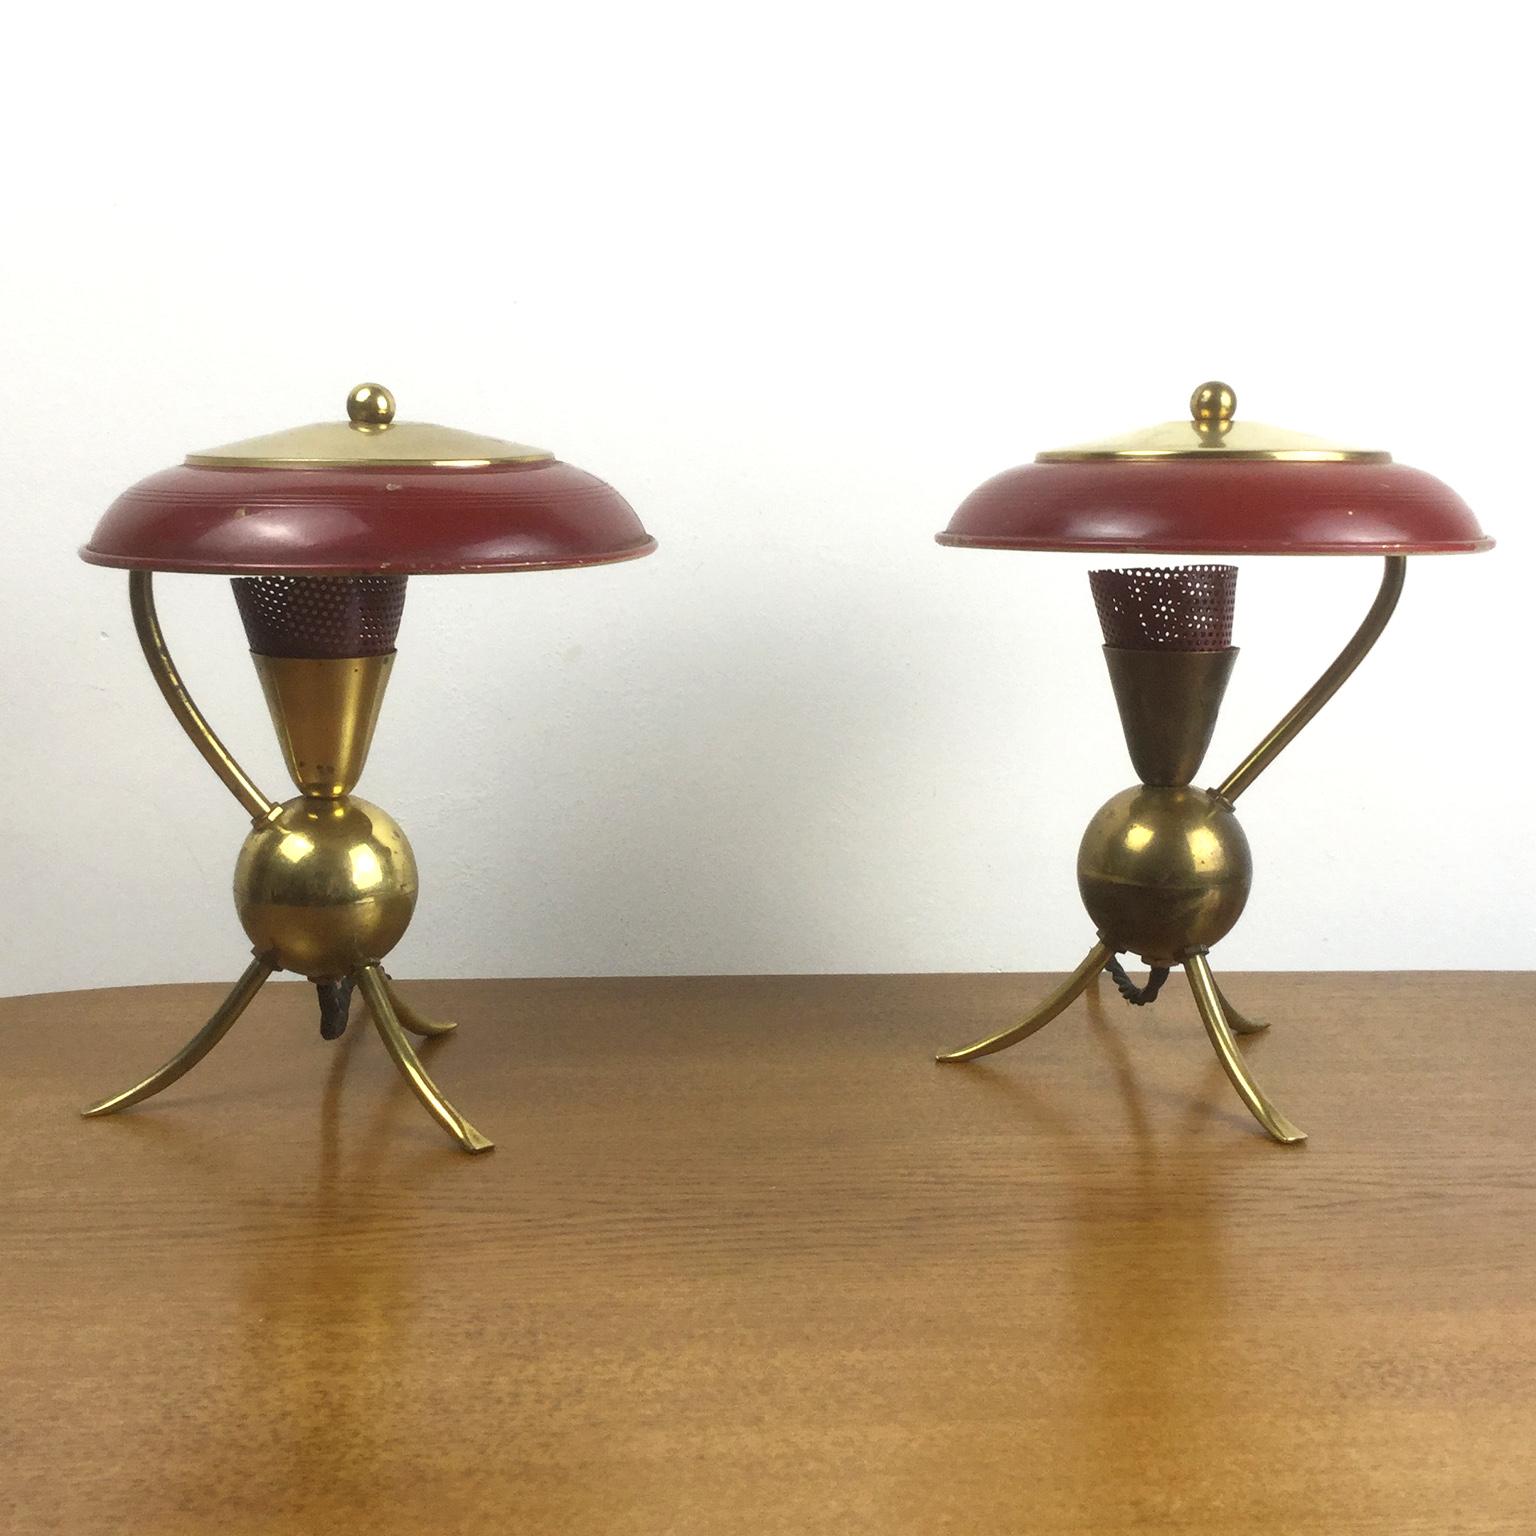 Mid-Century Modern Pair of Red Enamel and Brass Tripod Table Lamp, French, 1950s For Sale